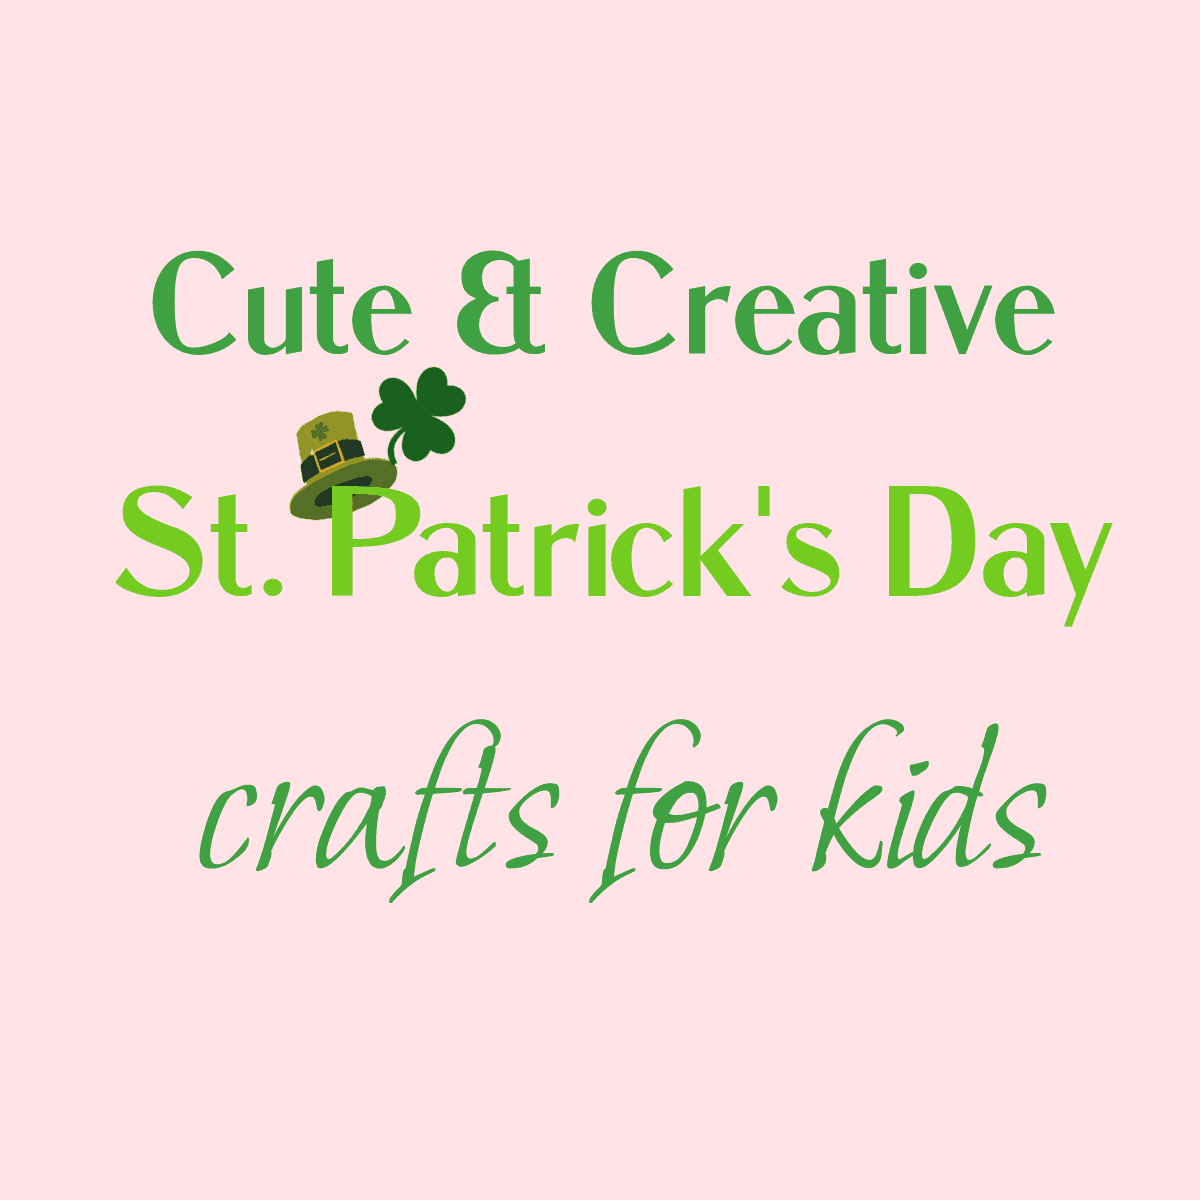 Cute & Creative St. Patrick's Day Crafts for Kids